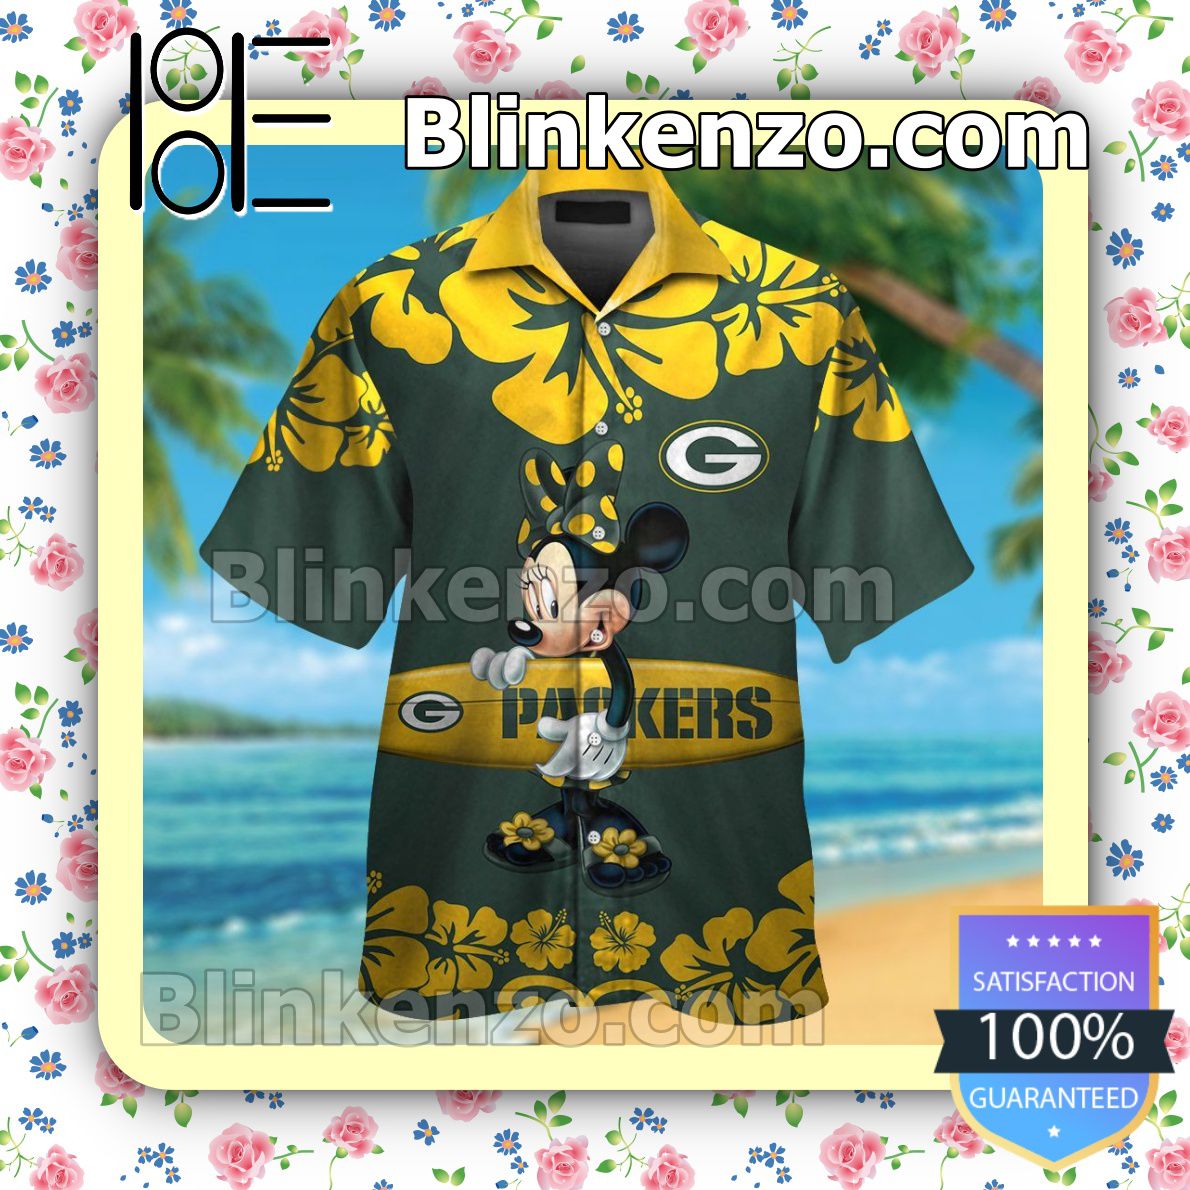 Green Bay Packers & Minnie Mouse Mens Shirt, Swim Trunk